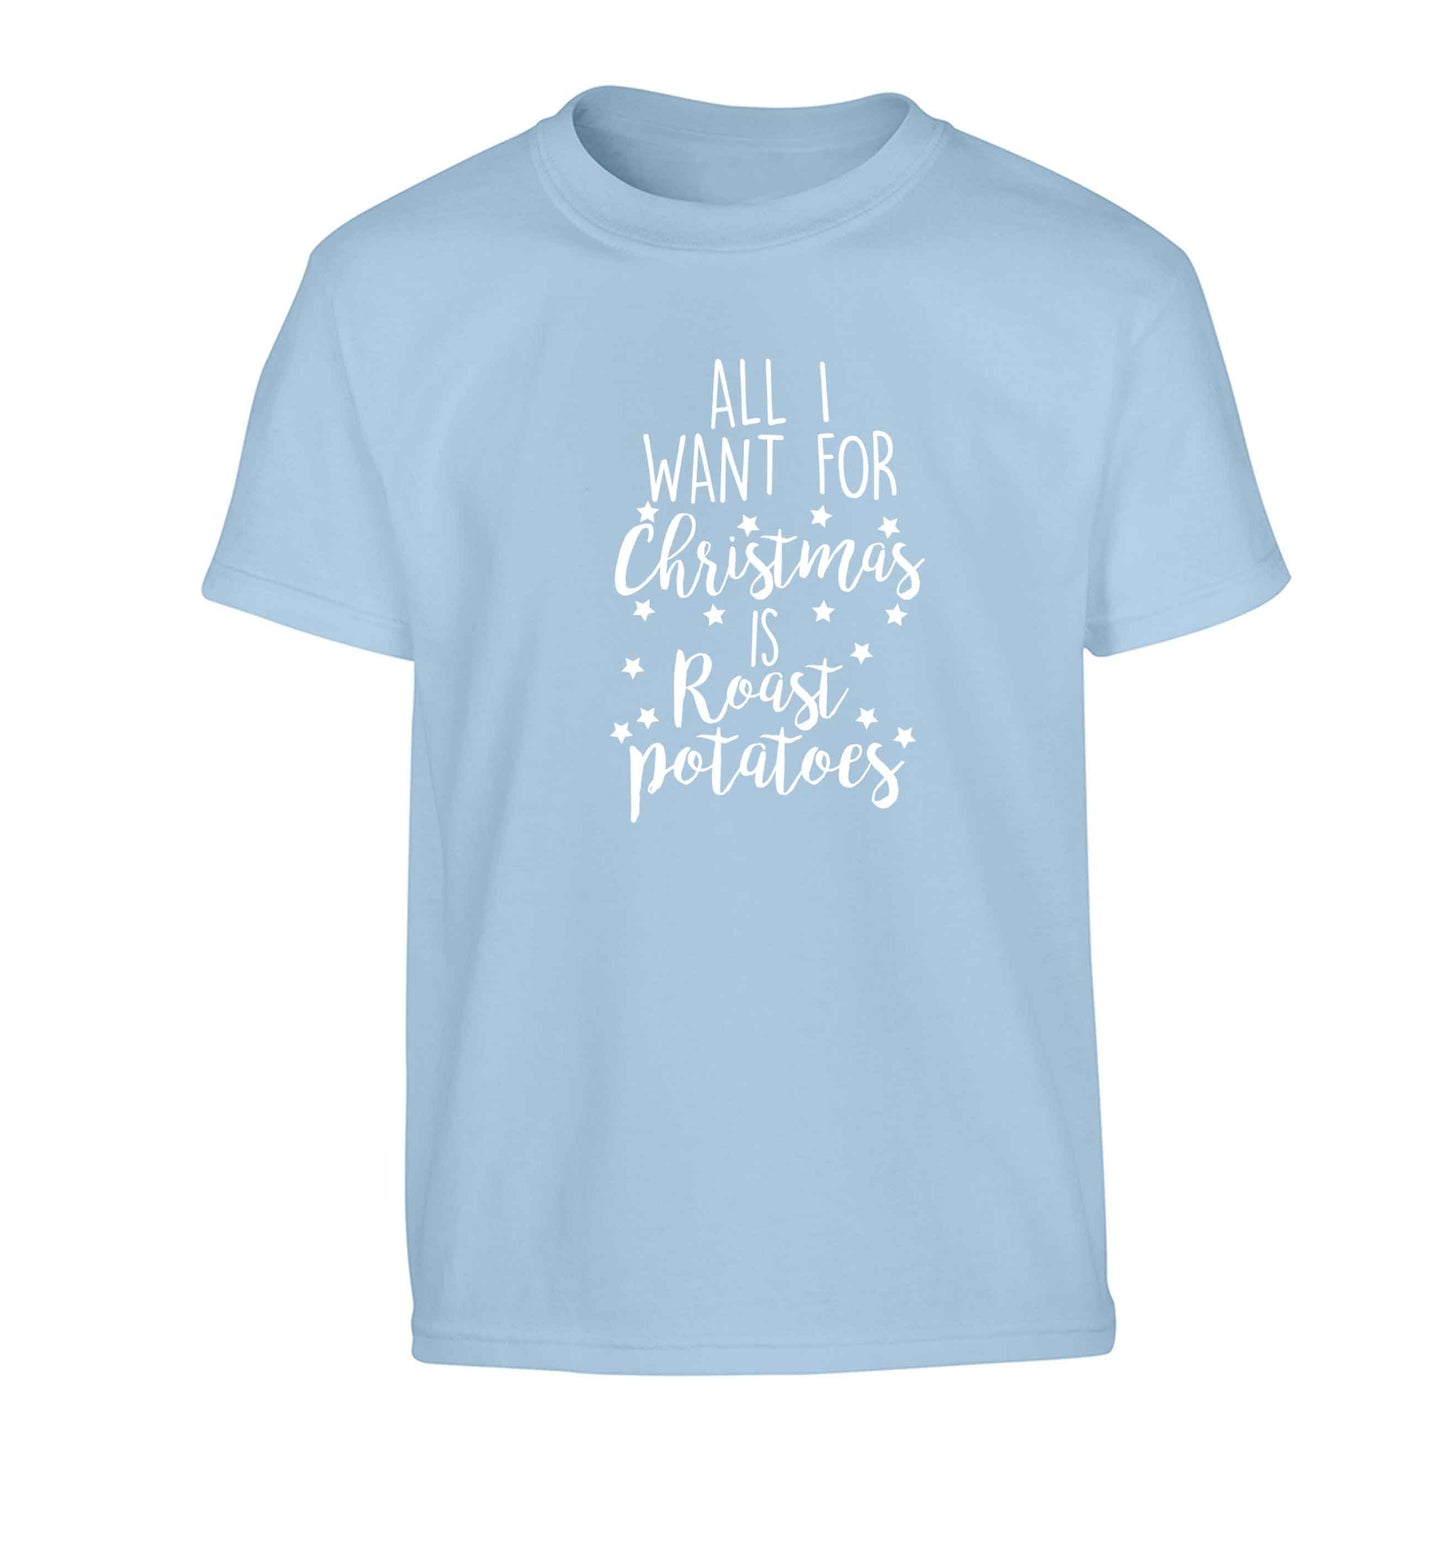 All I want for Christmas is roast potatoes Children's light blue Tshirt 12-13 Years